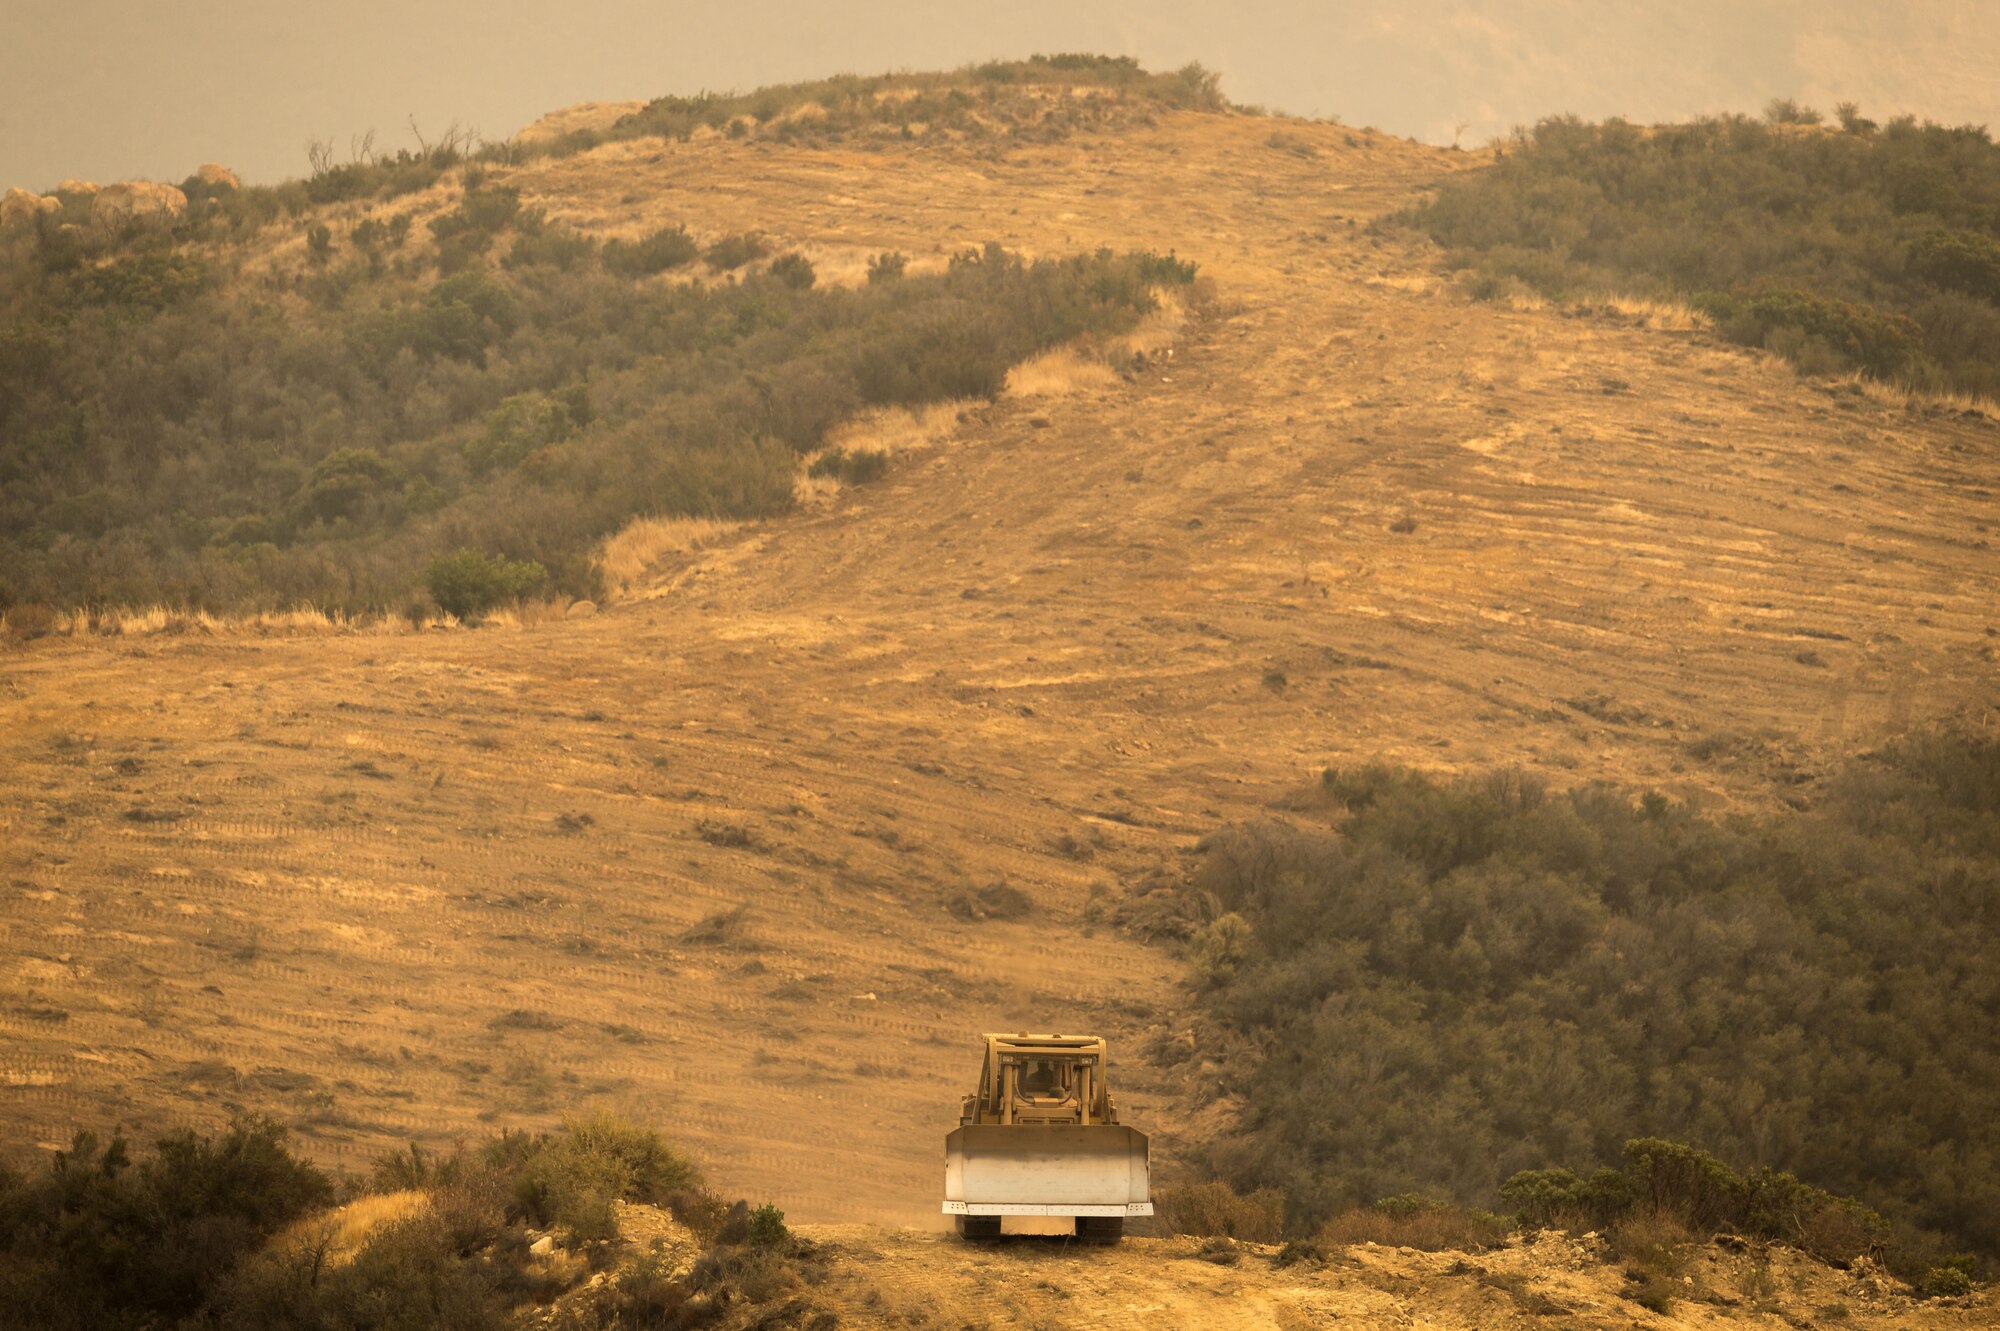 A bulldozer clears away foliage to form a fire-break on a ridge in the Los Padres National Forest above Santa Barbara, California, Dec. 11, 2017. C-130Js of the 146th Airlift Wing later dropped fire retardant chemicals along these fire-breaks to further slow the advance of the Thomas Fire, a large wildfire burning through Ventura and Santa Barbara Counties. (U.S. Air Force photo by J.M. Eddins Jr.)